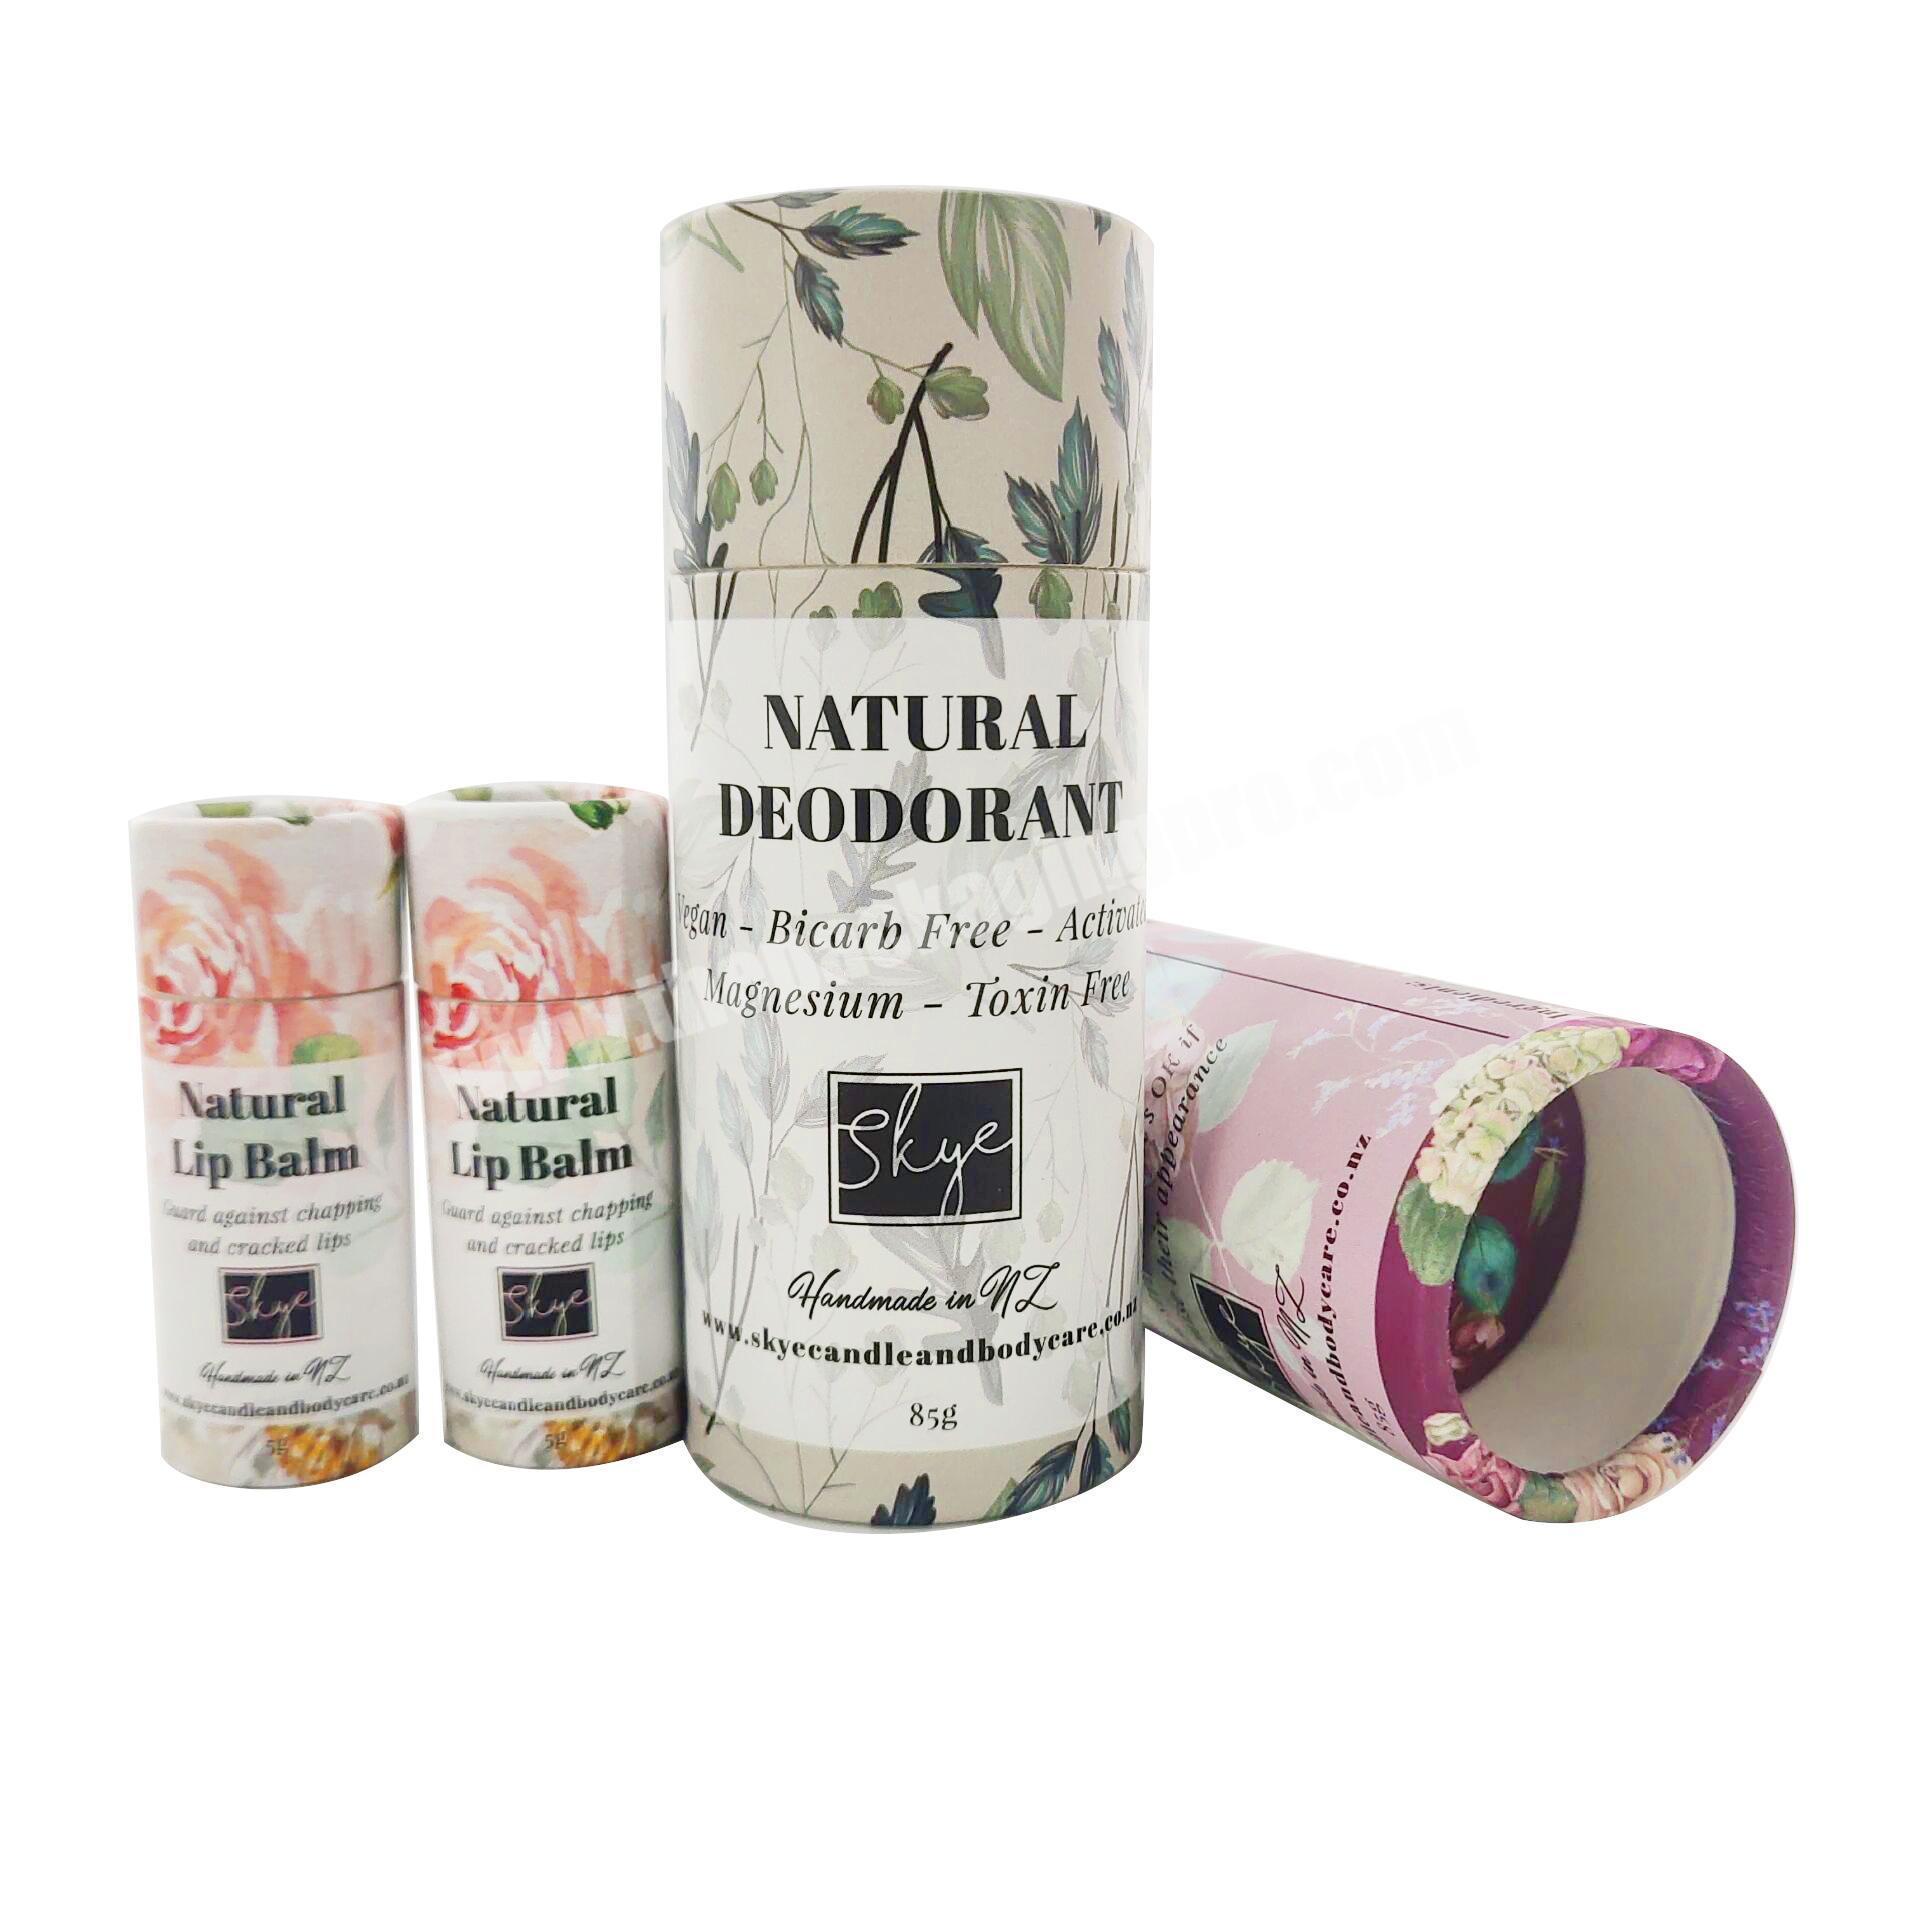 100% biodegradable packaging cardboard push up deodorant stick containers